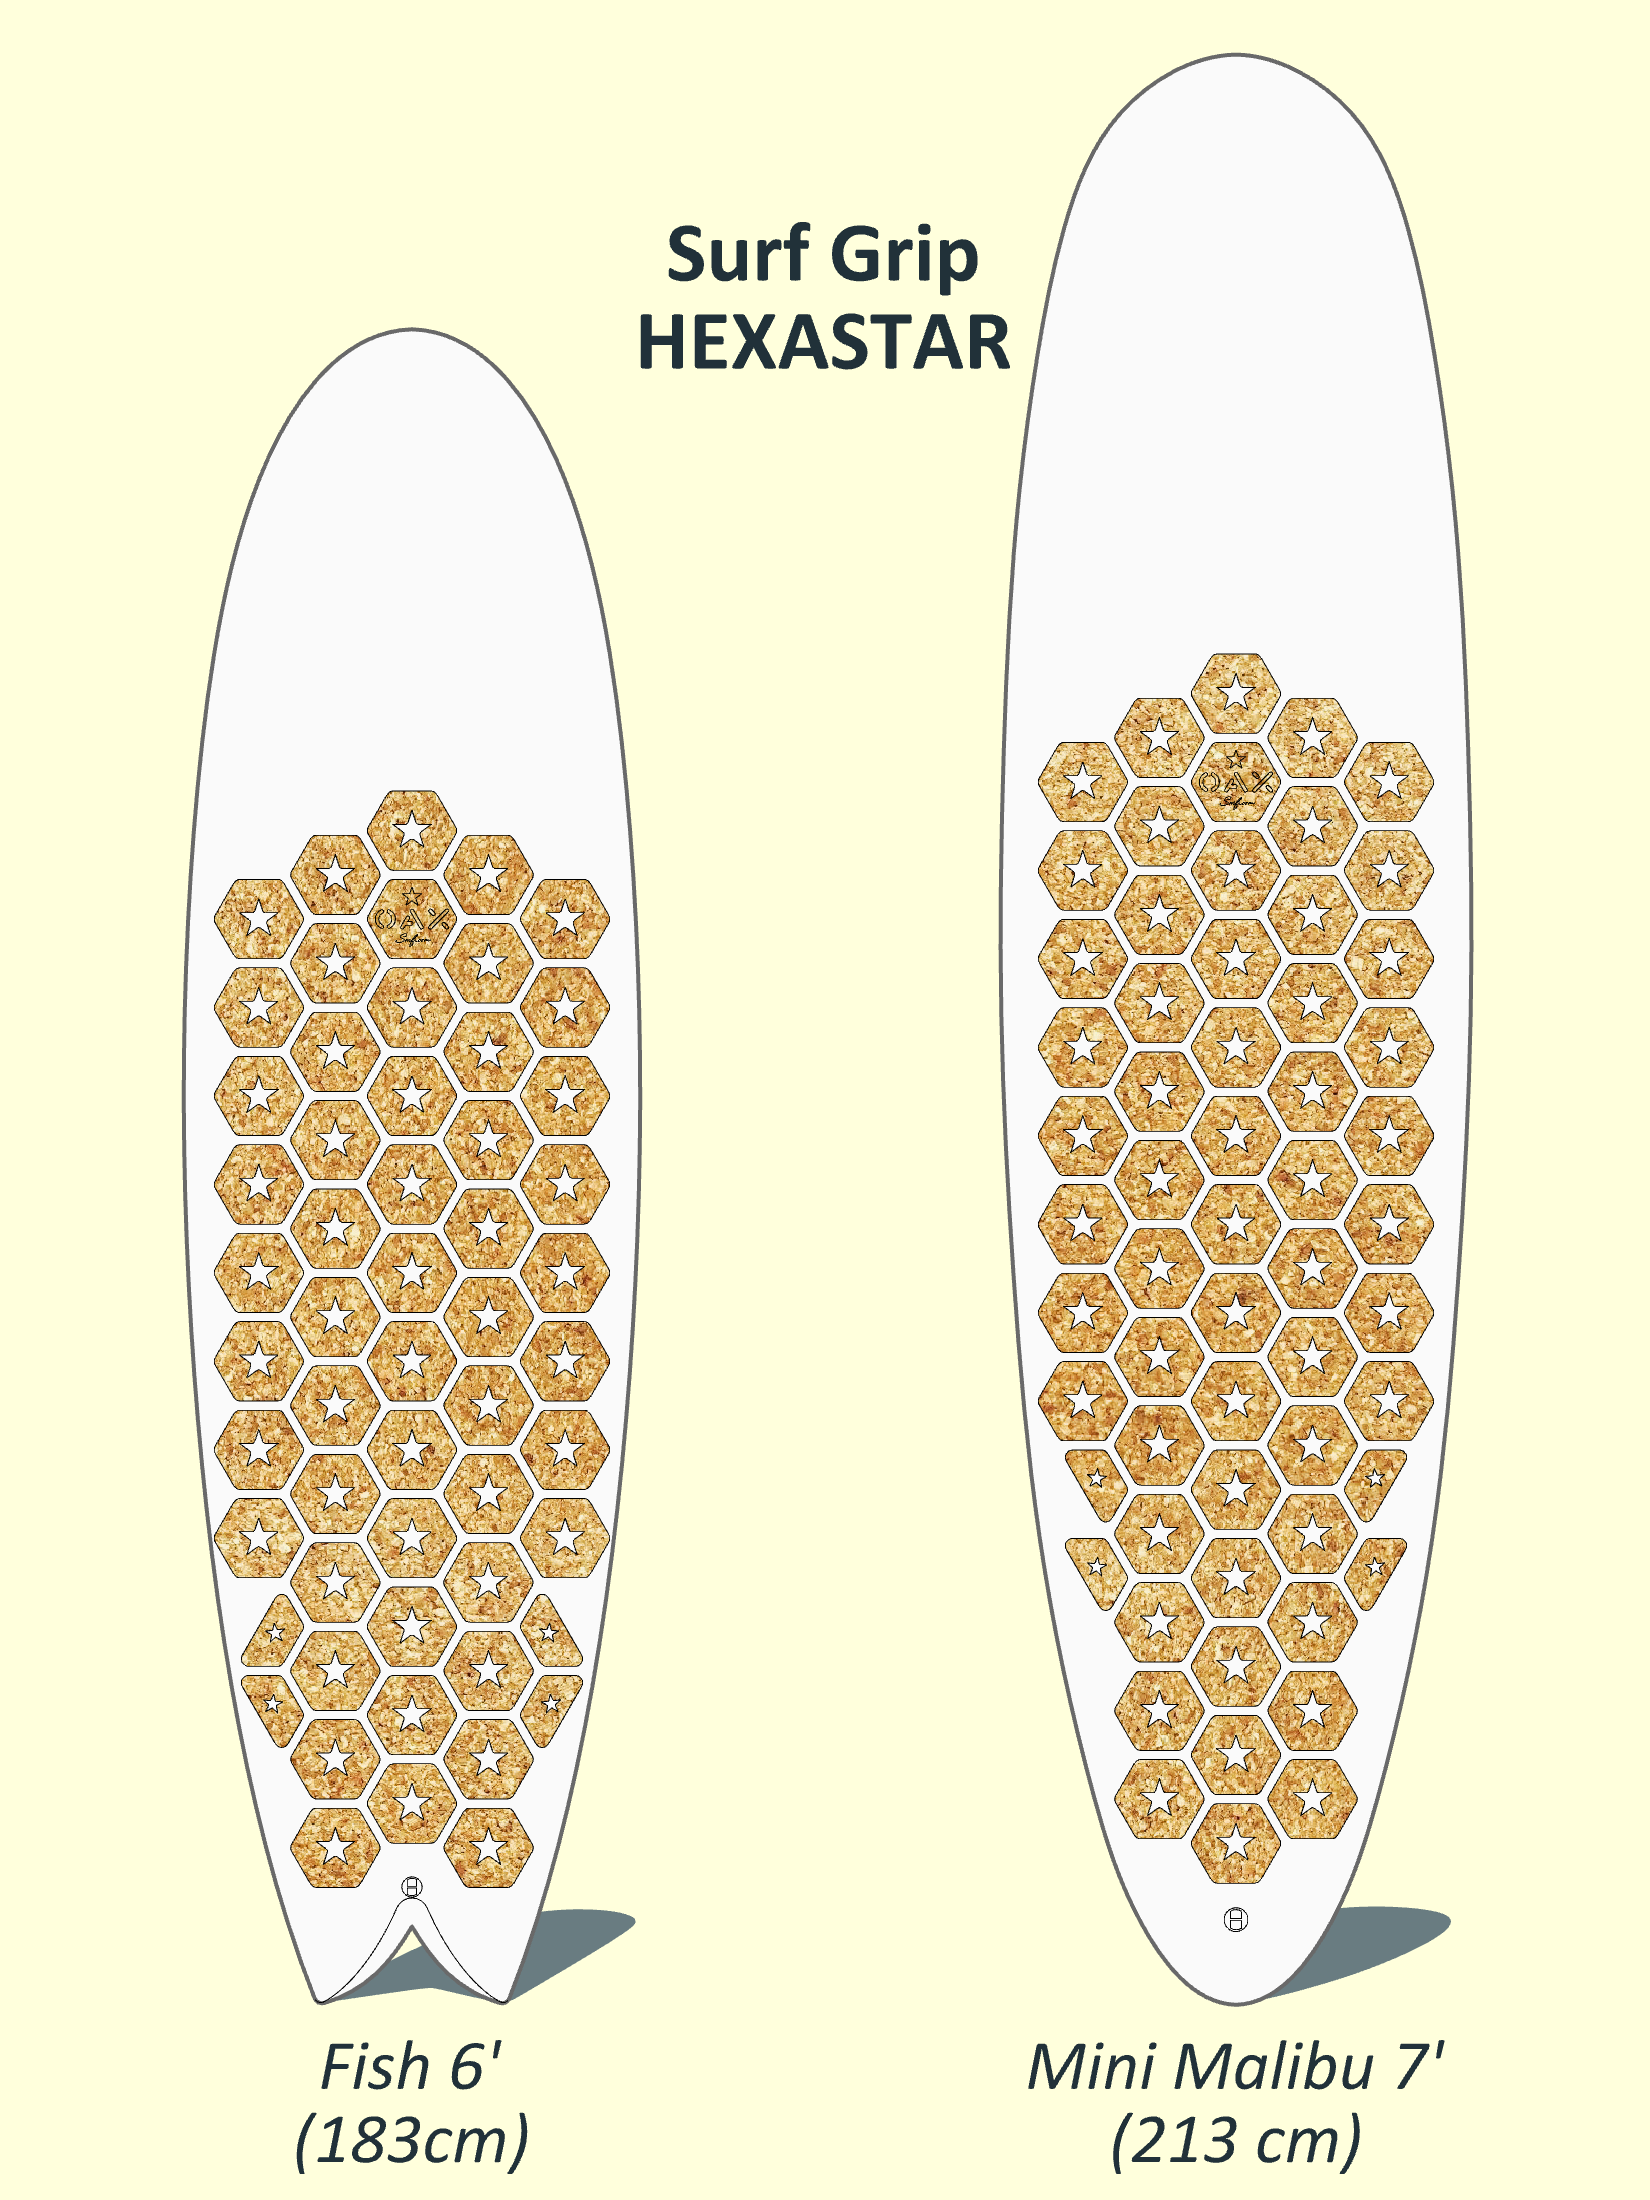 TYPES OF BOARDS